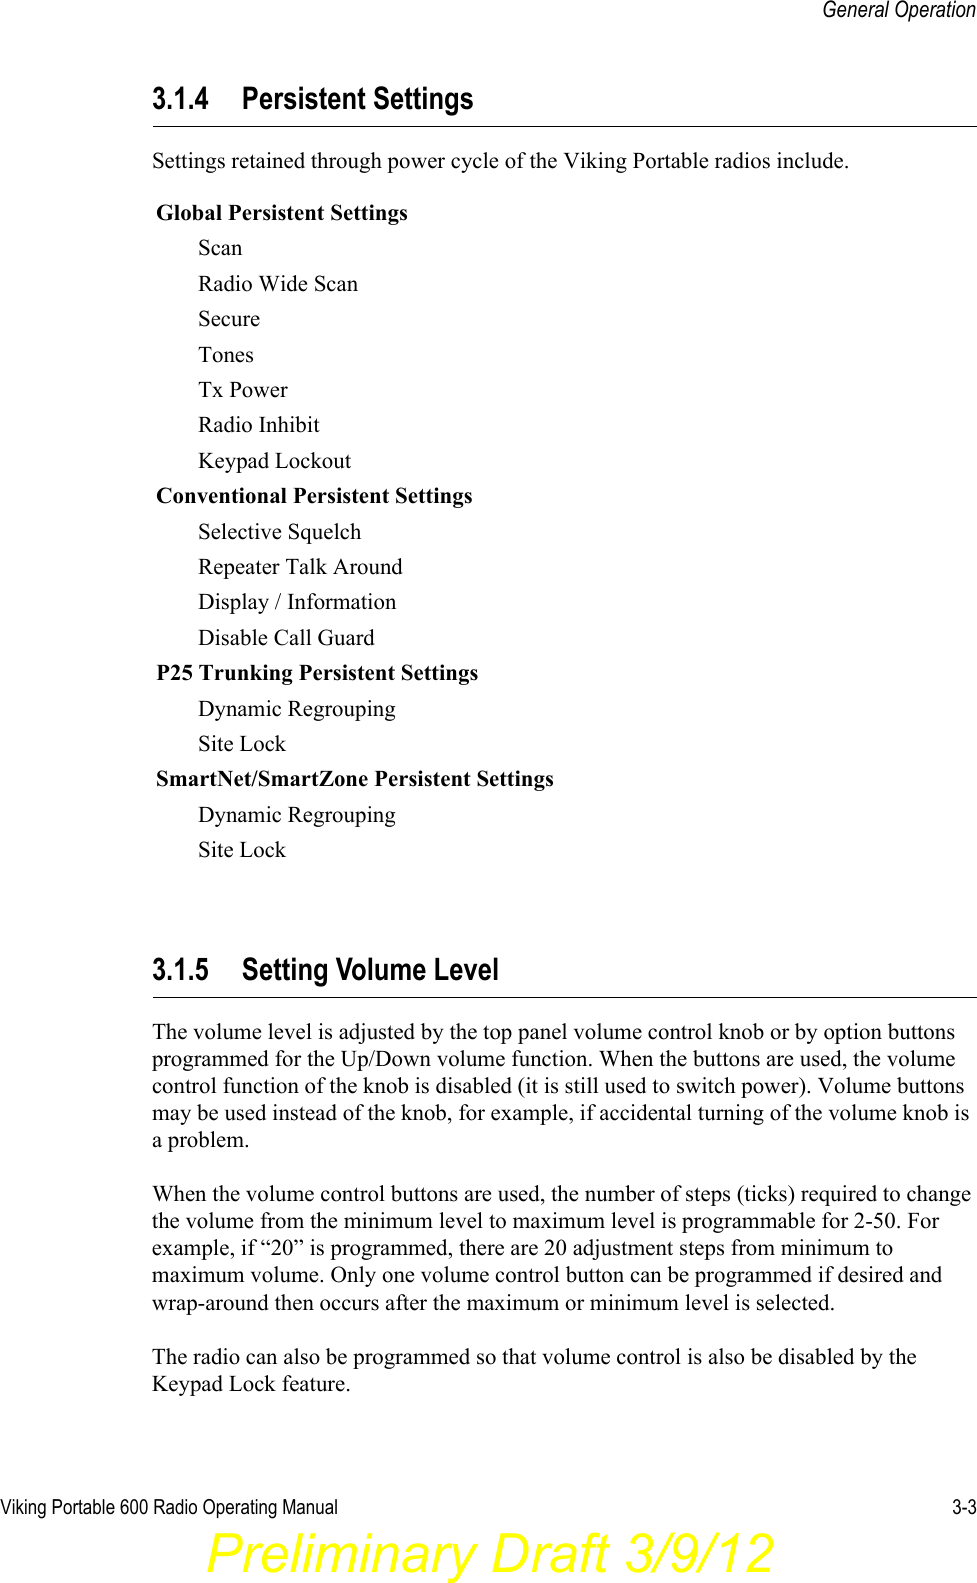 Viking Portable 600 Radio Operating Manual 3-3General Operation3.1.4 Persistent SettingsSettings retained through power cycle of the Viking Portable radios include. 3.1.5 Setting Volume LevelThe volume level is adjusted by the top panel volume control knob or by option buttons programmed for the Up/Down volume function. When the buttons are used, the volume control function of the knob is disabled (it is still used to switch power). Volume buttons may be used instead of the knob, for example, if accidental turning of the volume knob is a problem.When the volume control buttons are used, the number of steps (ticks) required to change the volume from the minimum level to maximum level is programmable for 2-50. For example, if “20” is programmed, there are 20 adjustment steps from minimum to maximum volume. Only one volume control button can be programmed if desired and wrap-around then occurs after the maximum or minimum level is selected.The radio can also be programmed so that volume control is also be disabled by the Keypad Lock feature.Global Persistent SettingsScanRadio Wide ScanSecureTonesTx PowerRadio InhibitKeypad LockoutConventional Persistent SettingsSelective SquelchRepeater Talk AroundDisplay / InformationDisable Call GuardP25 Trunking Persistent SettingsDynamic RegroupingSite LockSmartNet/SmartZone Persistent SettingsDynamic RegroupingSite LockPreliminary Draft 3/9/12